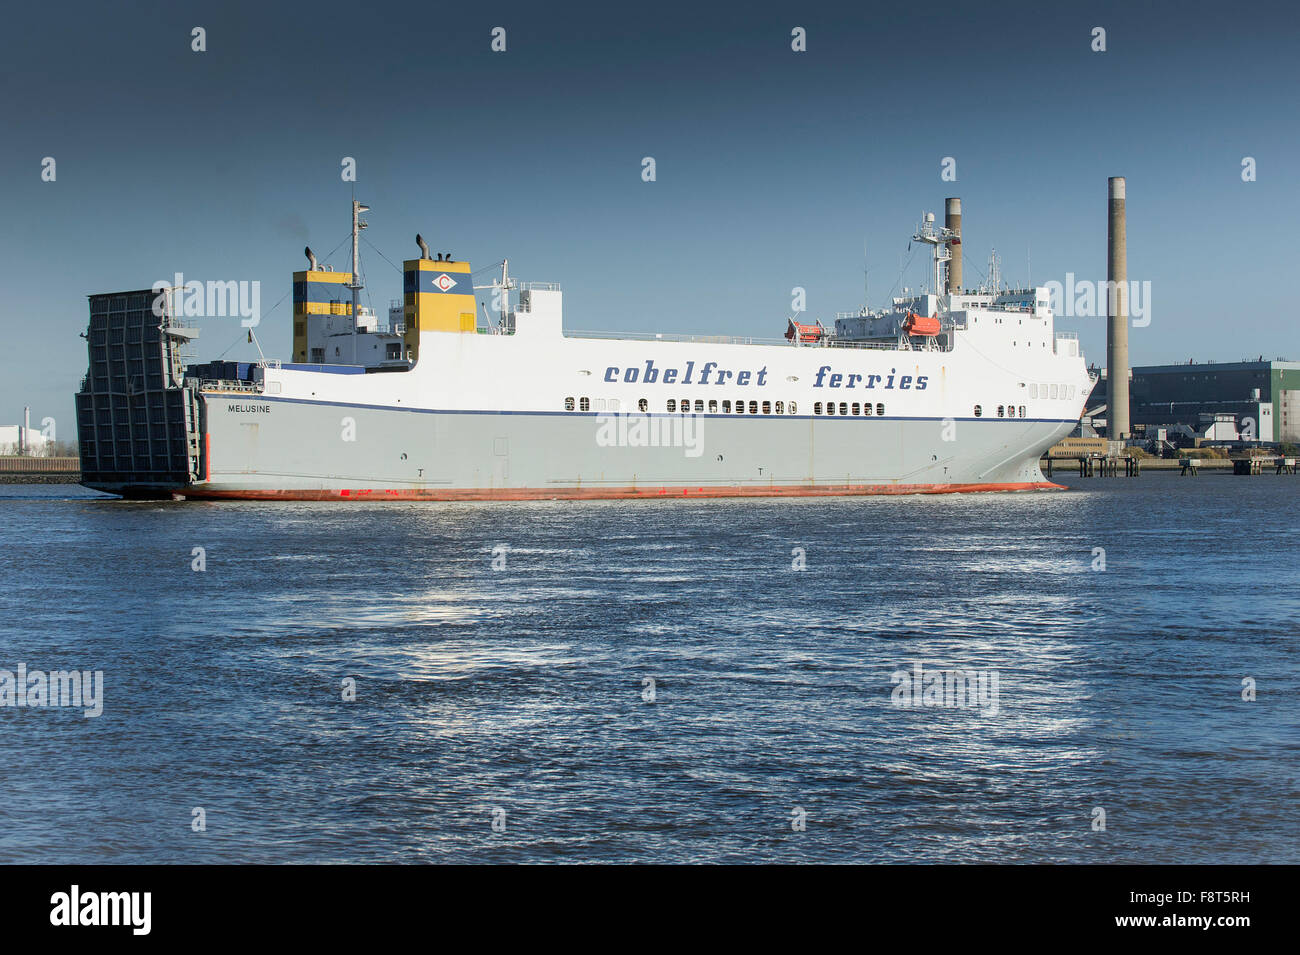 On the River Thames, the Melusine, a Ro-Ro cargo ferry from the Cobelfret Ferries Line steams downriver. Stock Photo